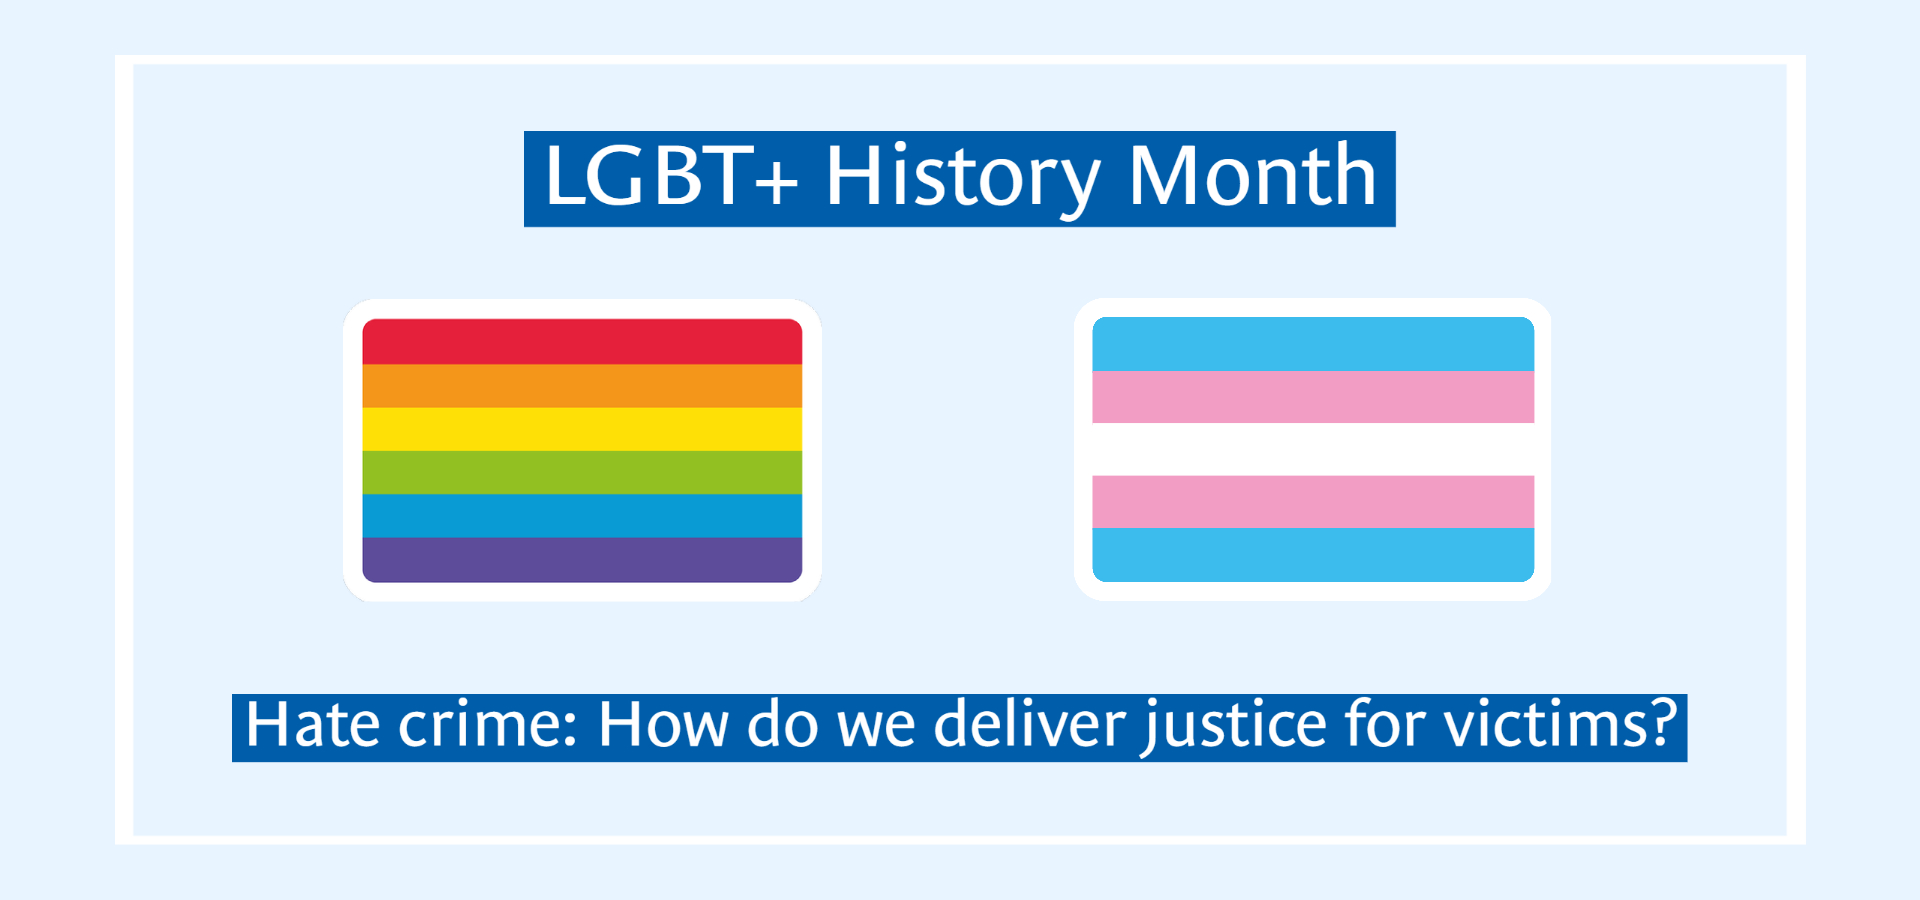 LGBT+ History Month: Hate Crime - how do we deliver justice for victims?